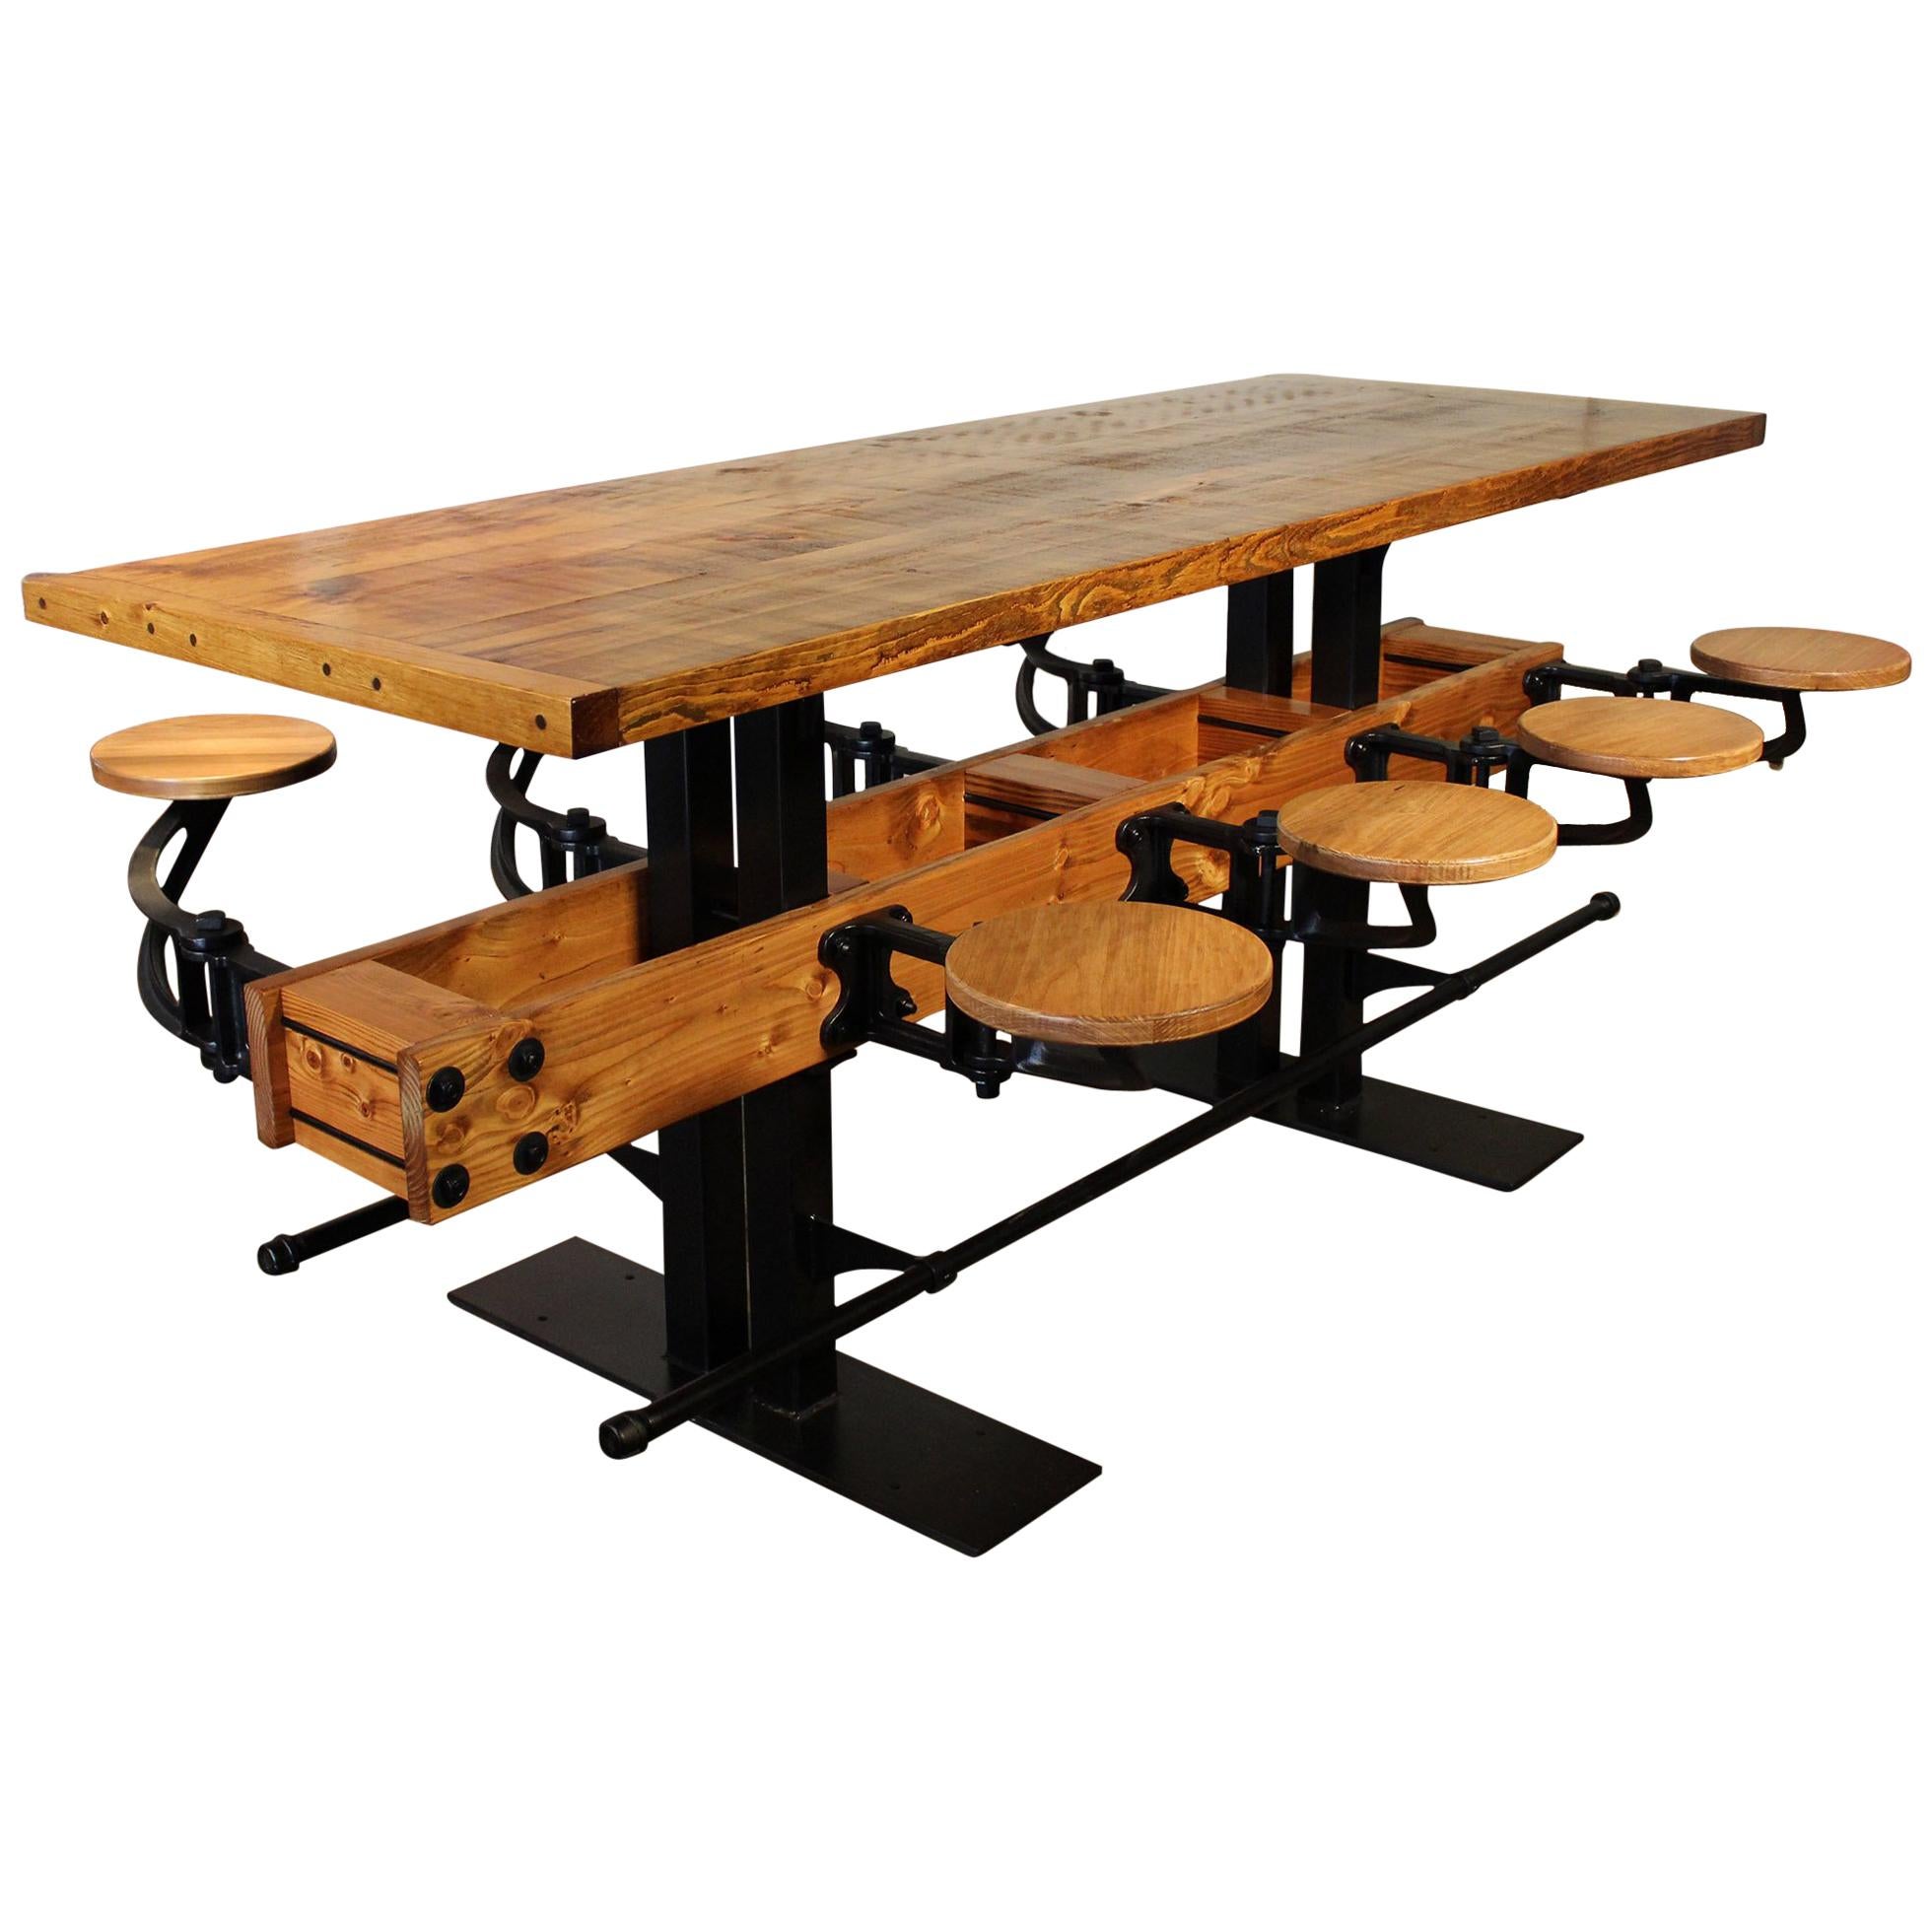 Industrial Restaurant Pub Table with Hideaway Seats